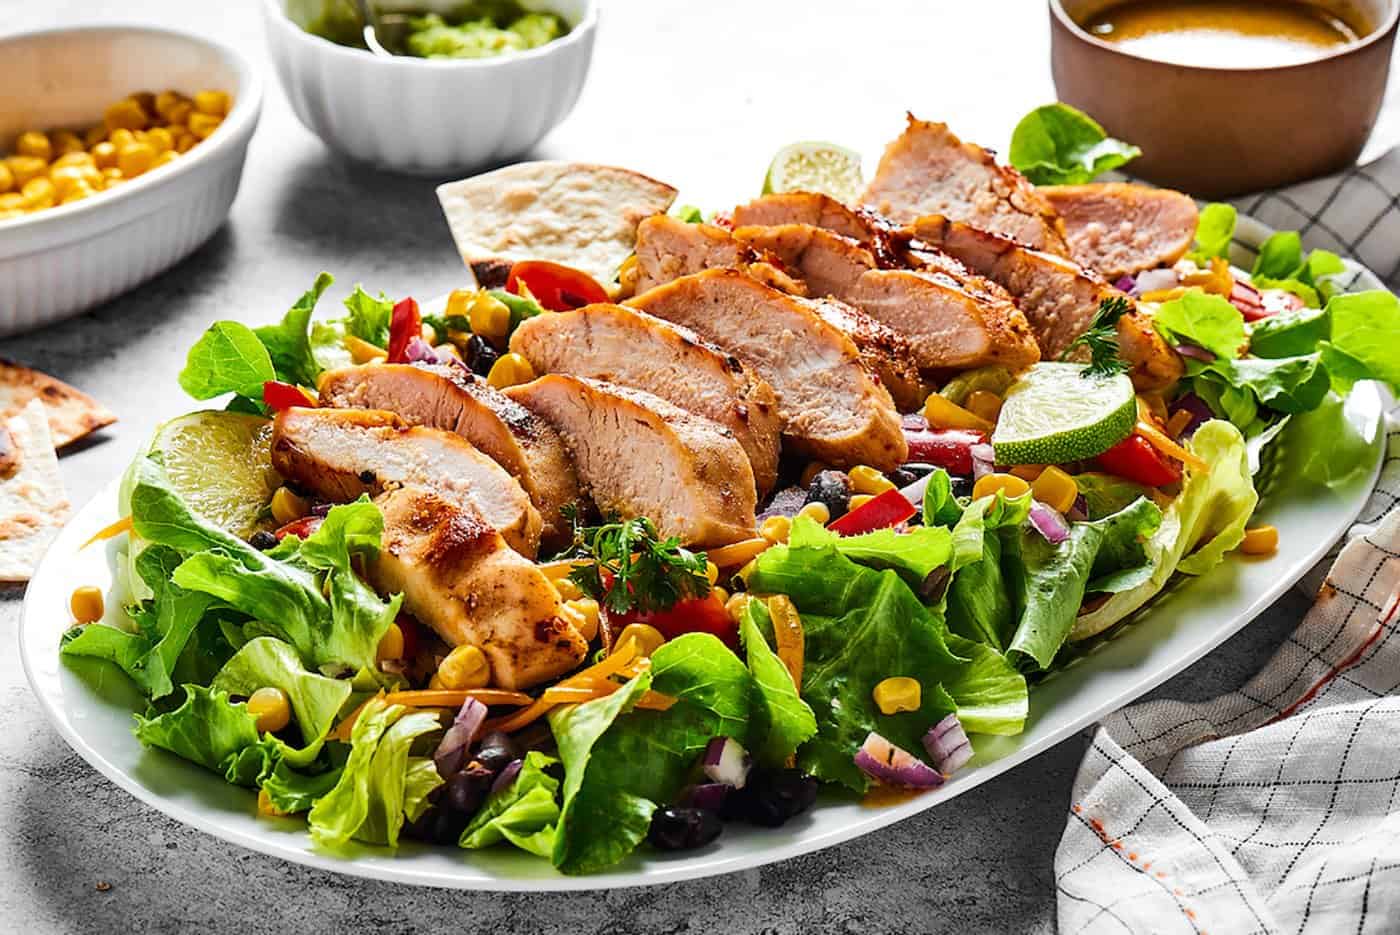 A platter of salad with fresh greens and sliced grilled chicken